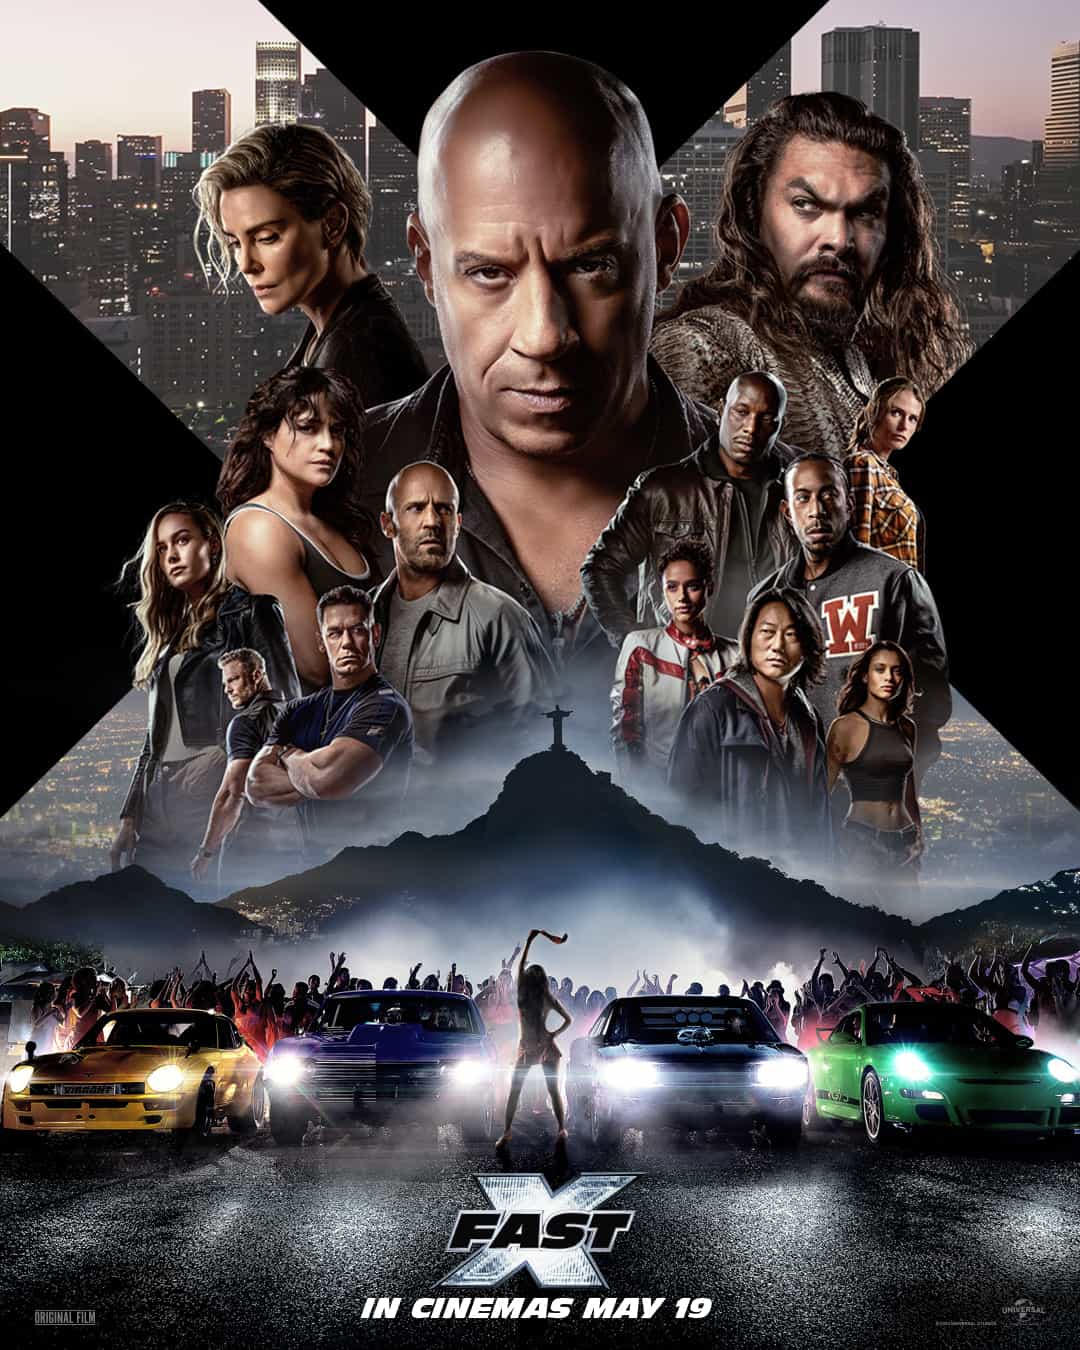 The first trailer has been released for Fast X starring Vin Diesel - movie UK release date 19th May 2023 #fastx